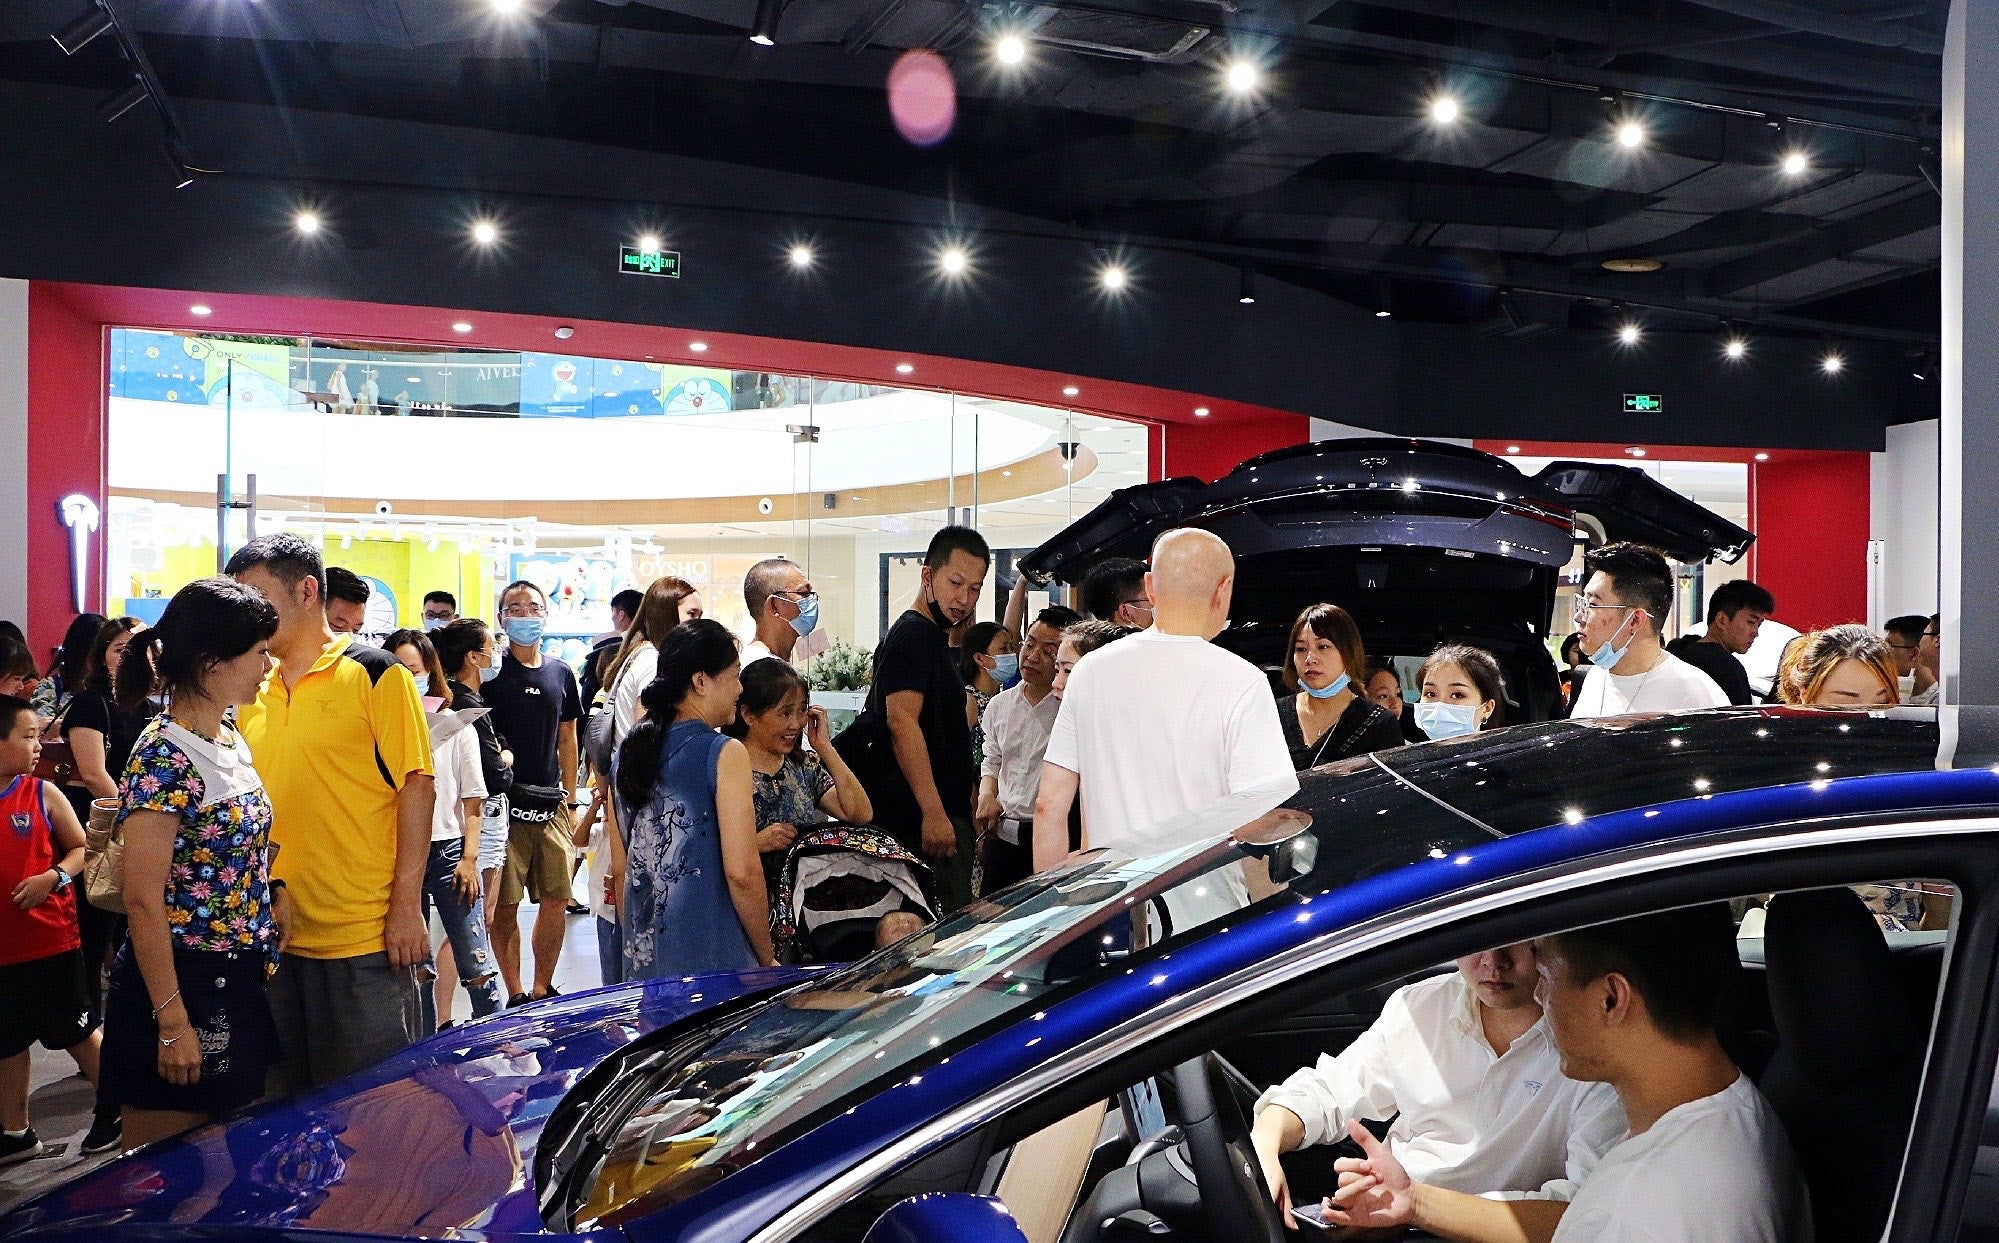 Tesla China Expands Stores Rapidly in Multiple Cities as Demand Skyrockets